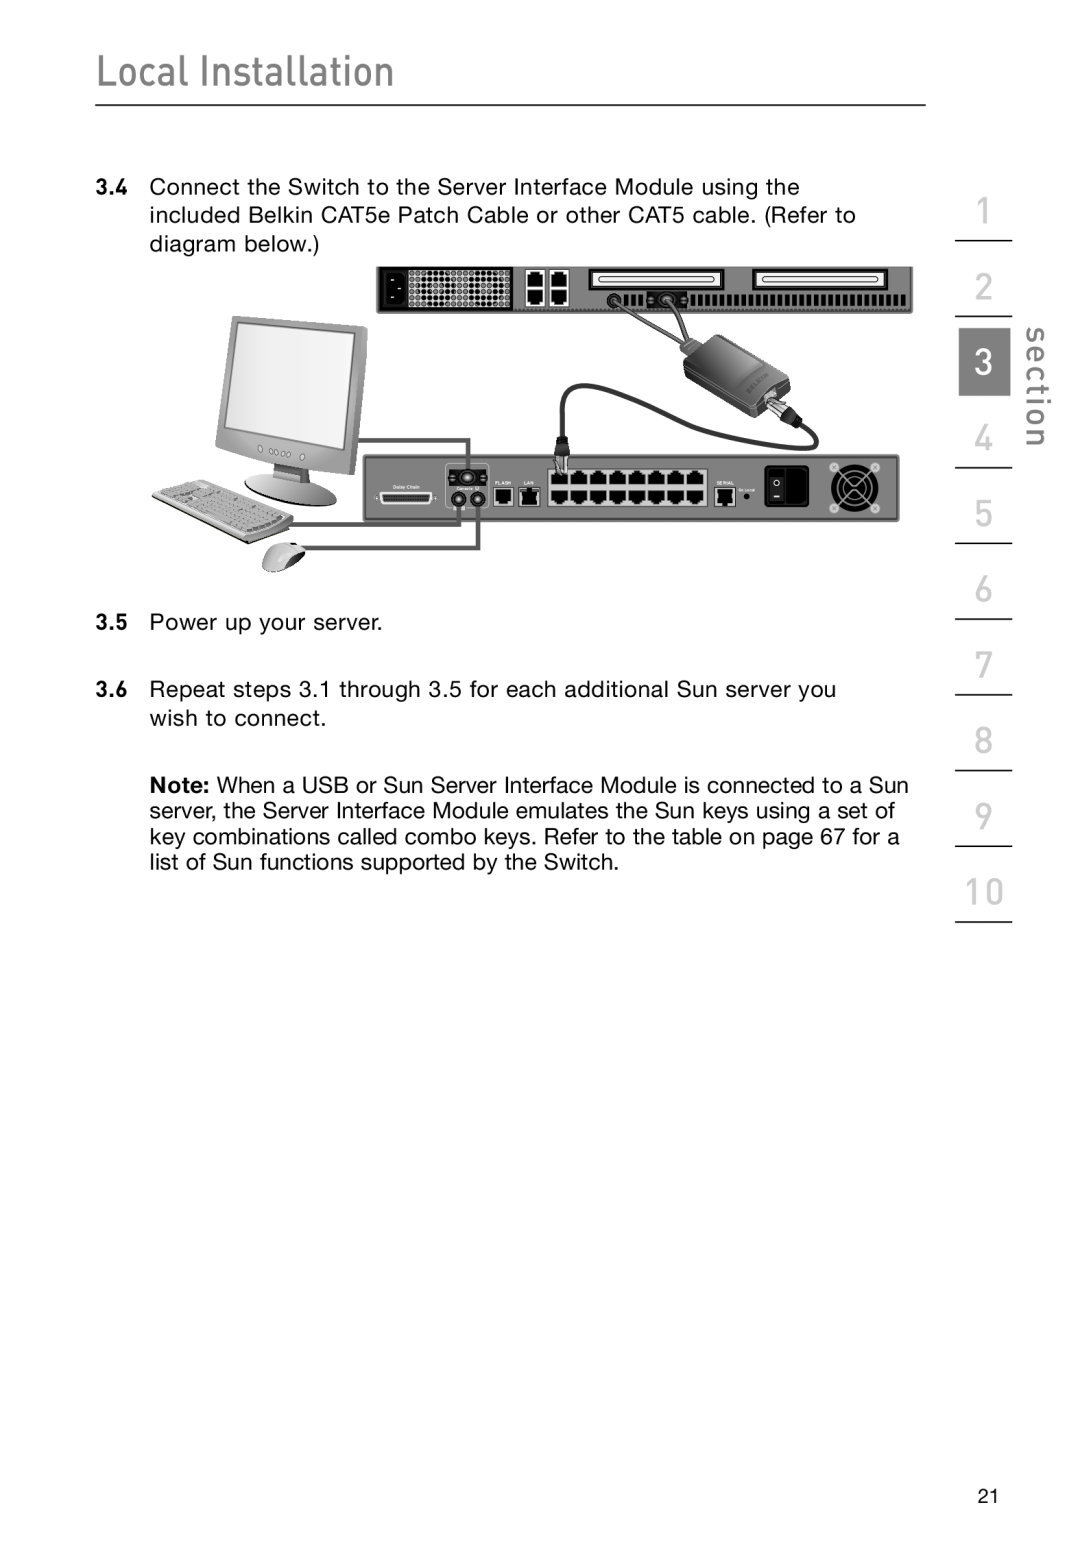 Belkin F1DP108G user manual Local Installation, section 